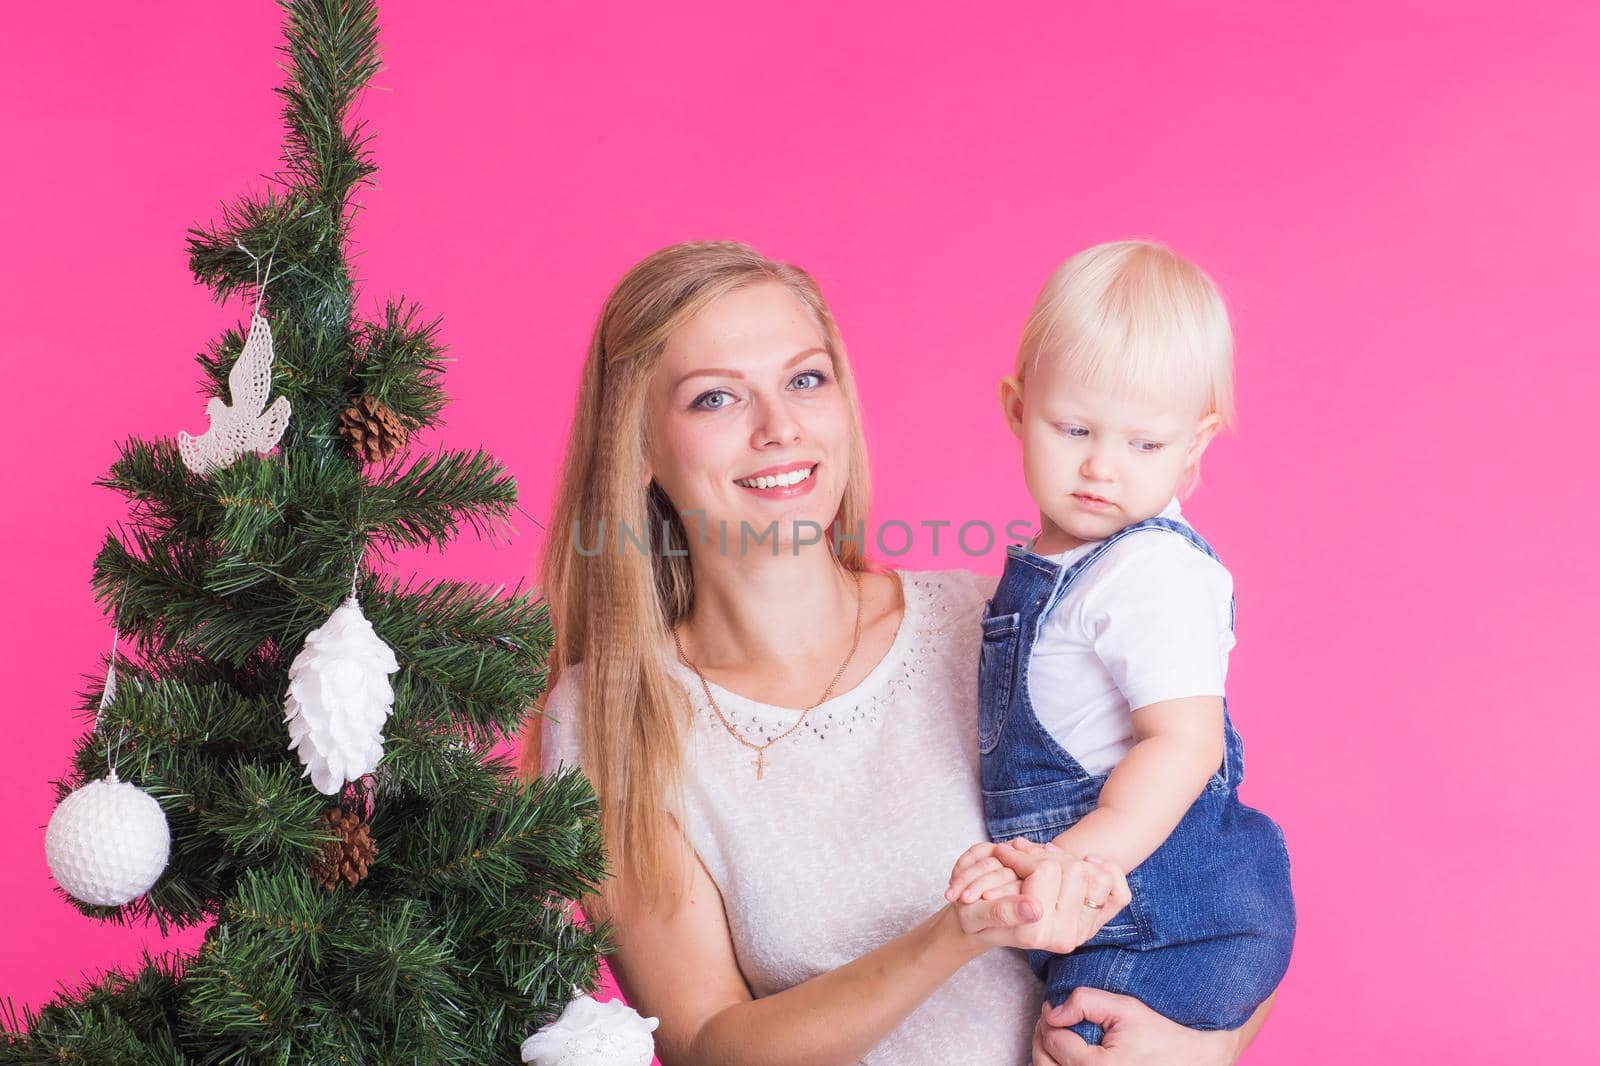 Christmas and holiday concept - Portrait of smiling woman holding her little daughter near Christmas tree on pink background.